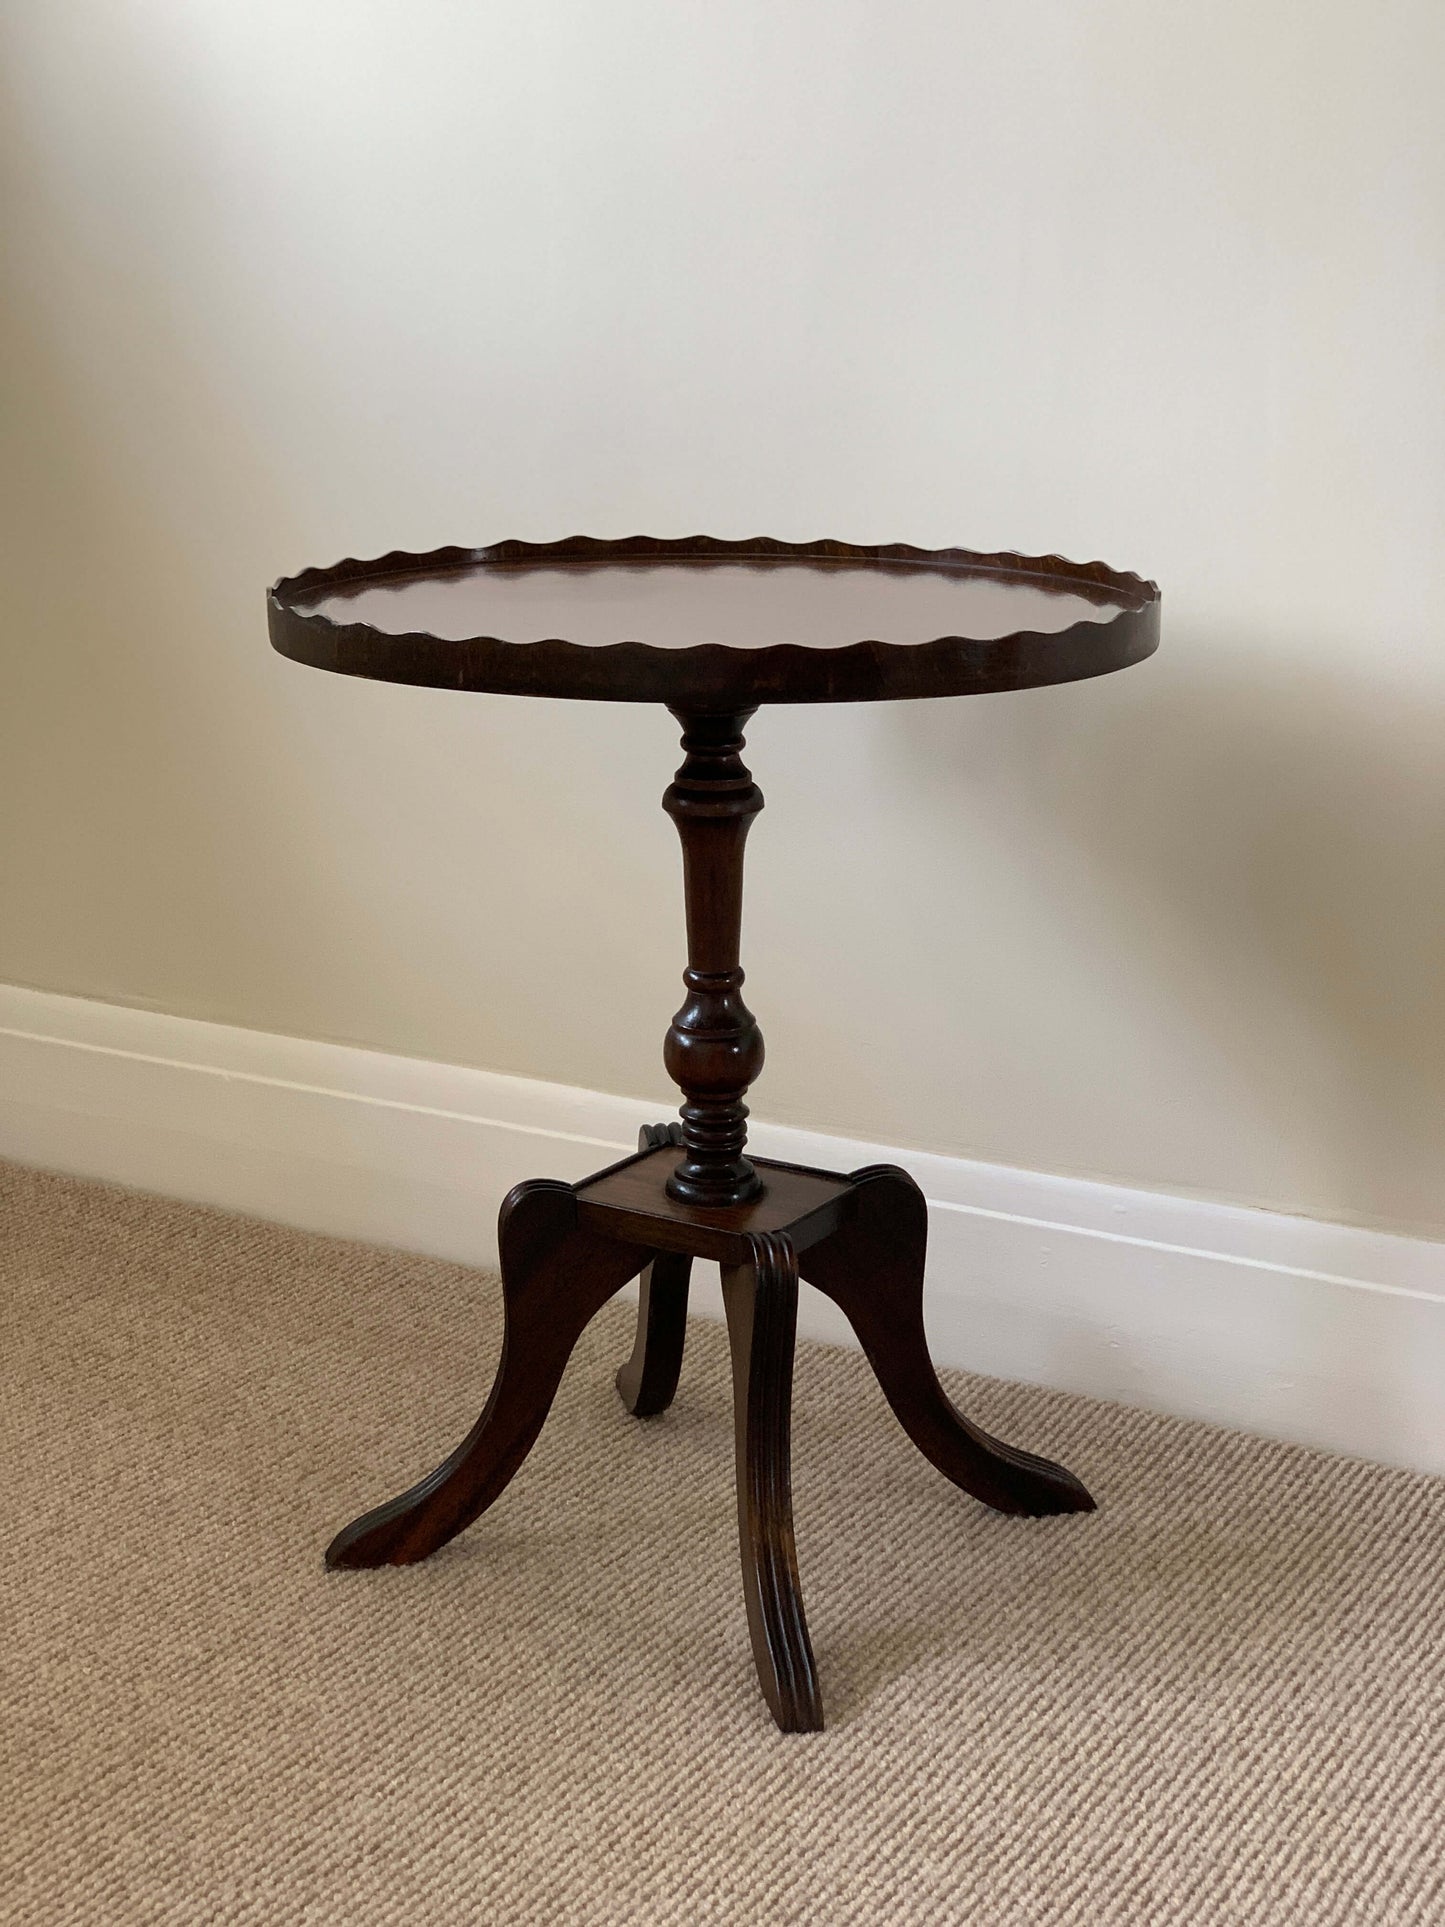 Vintage scallop-edged side table